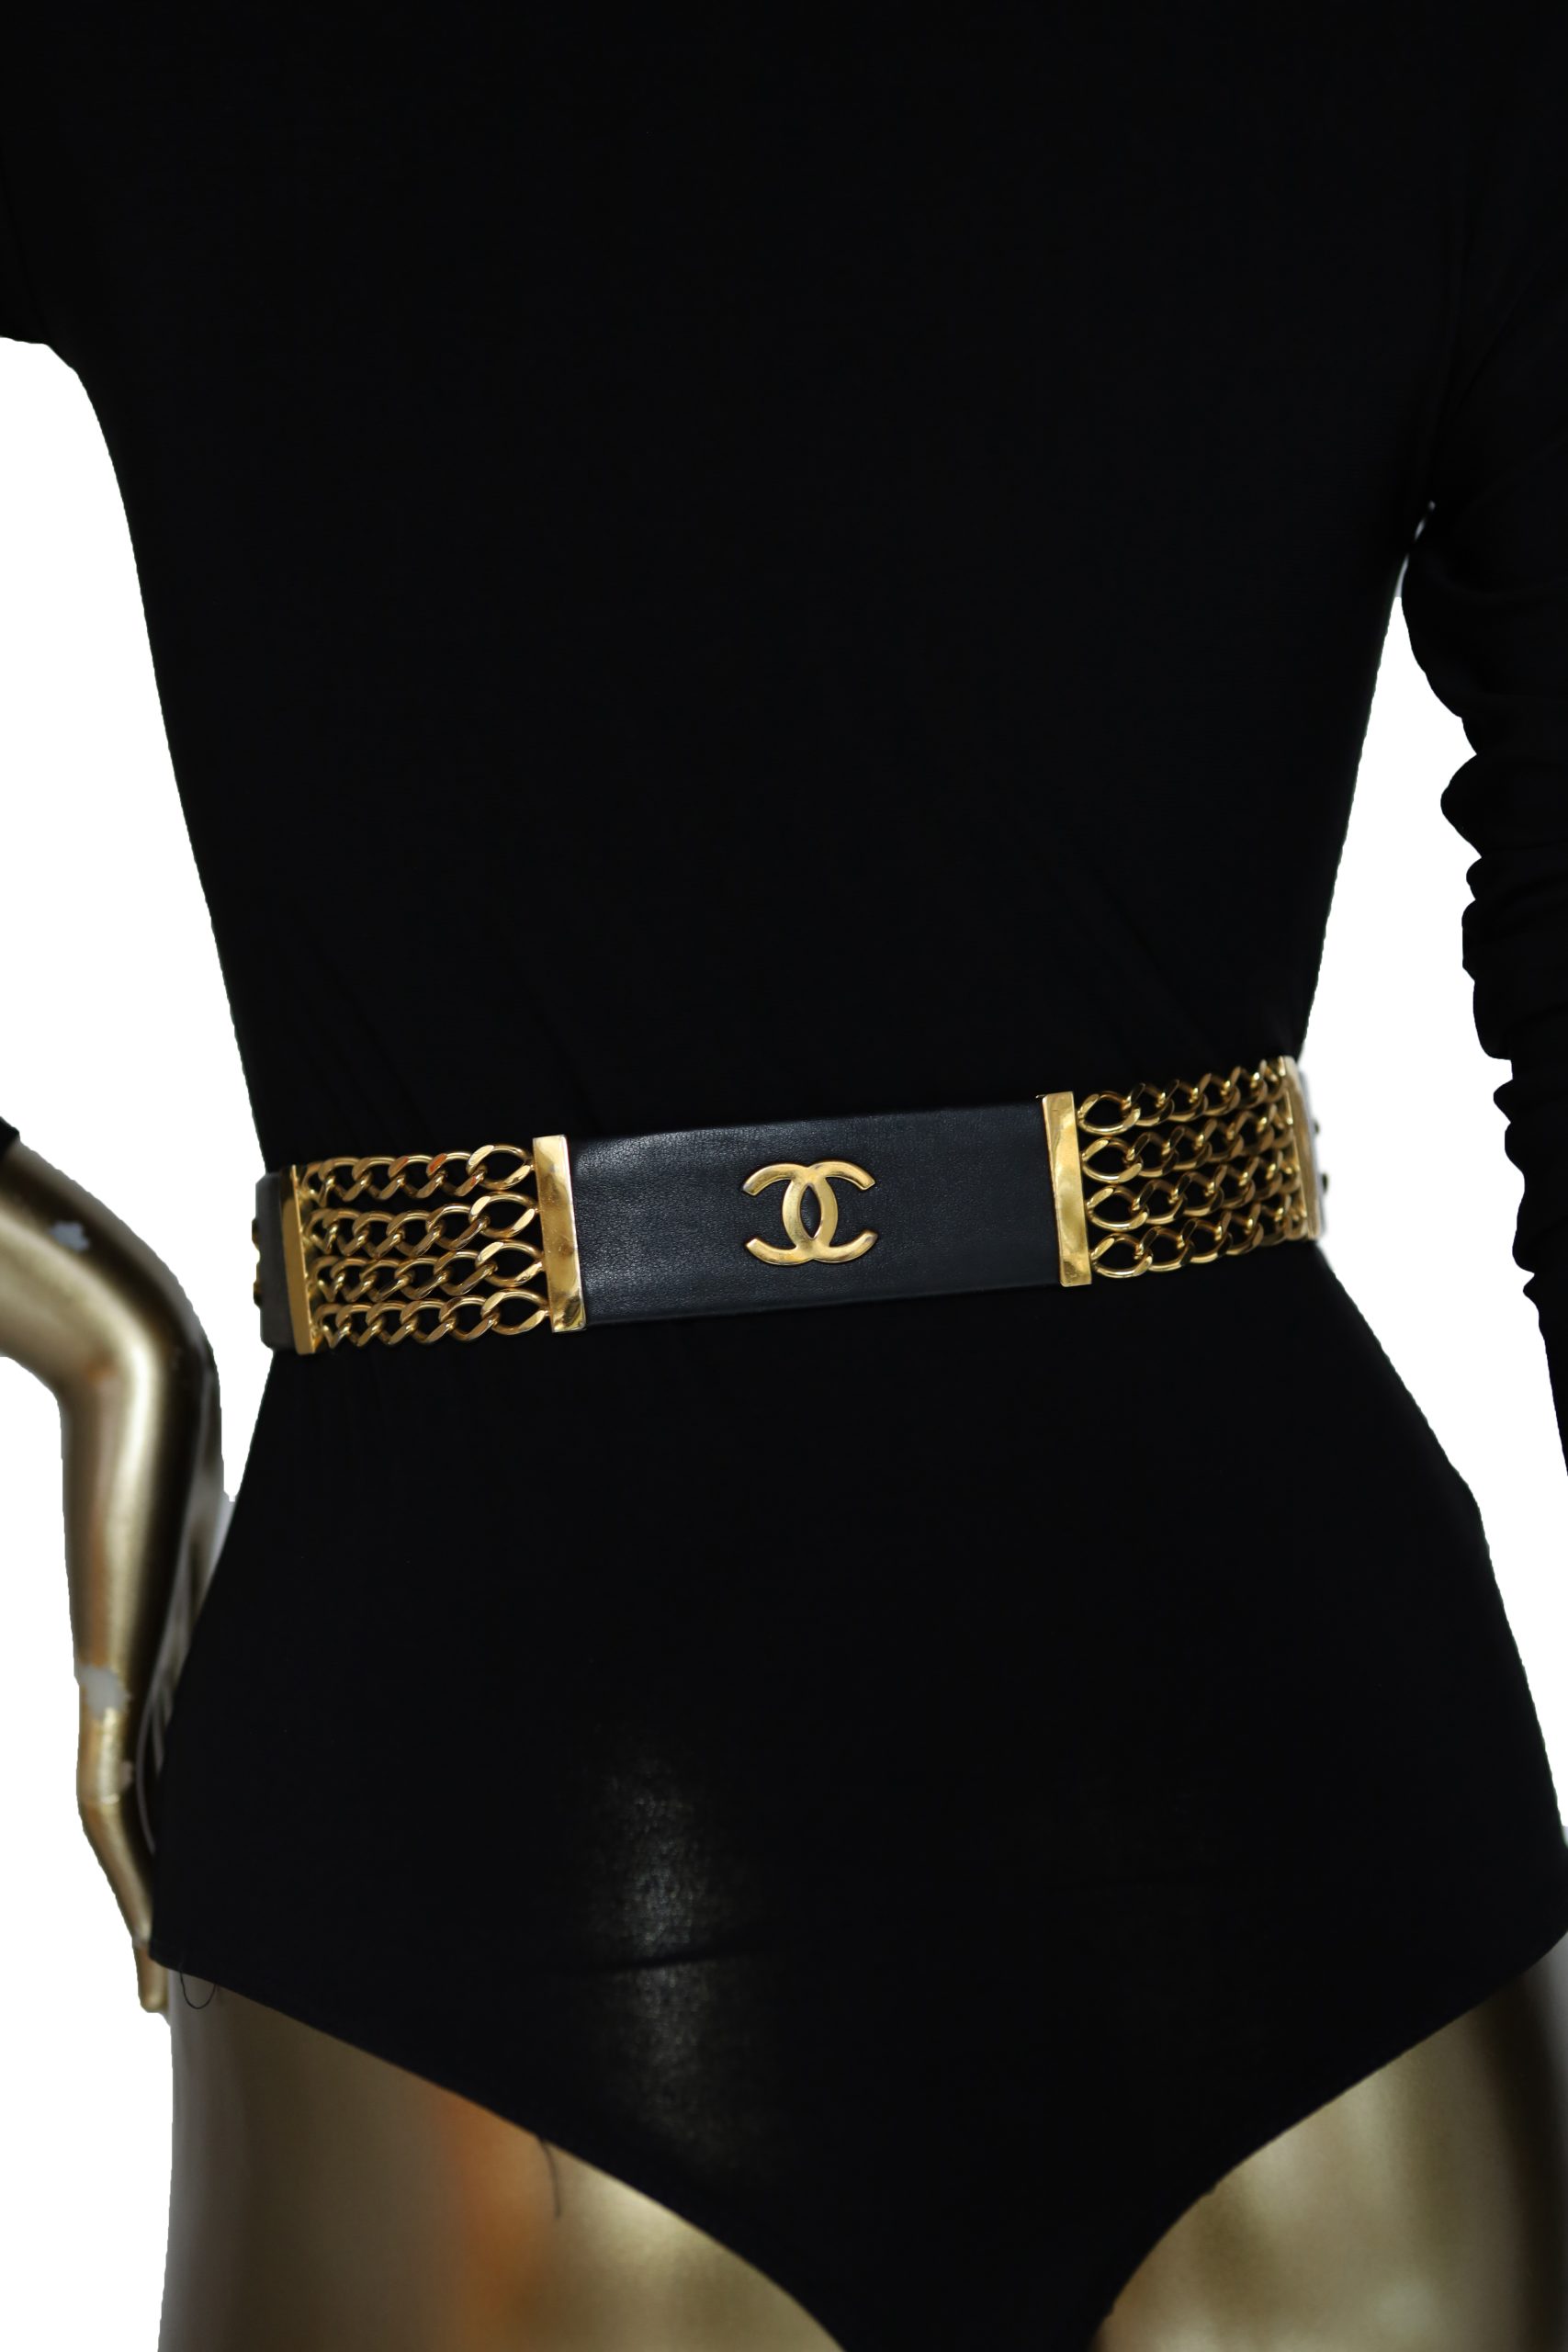 Chanel 2006 Vintage Belt with Chain Detail - Janet Mandell